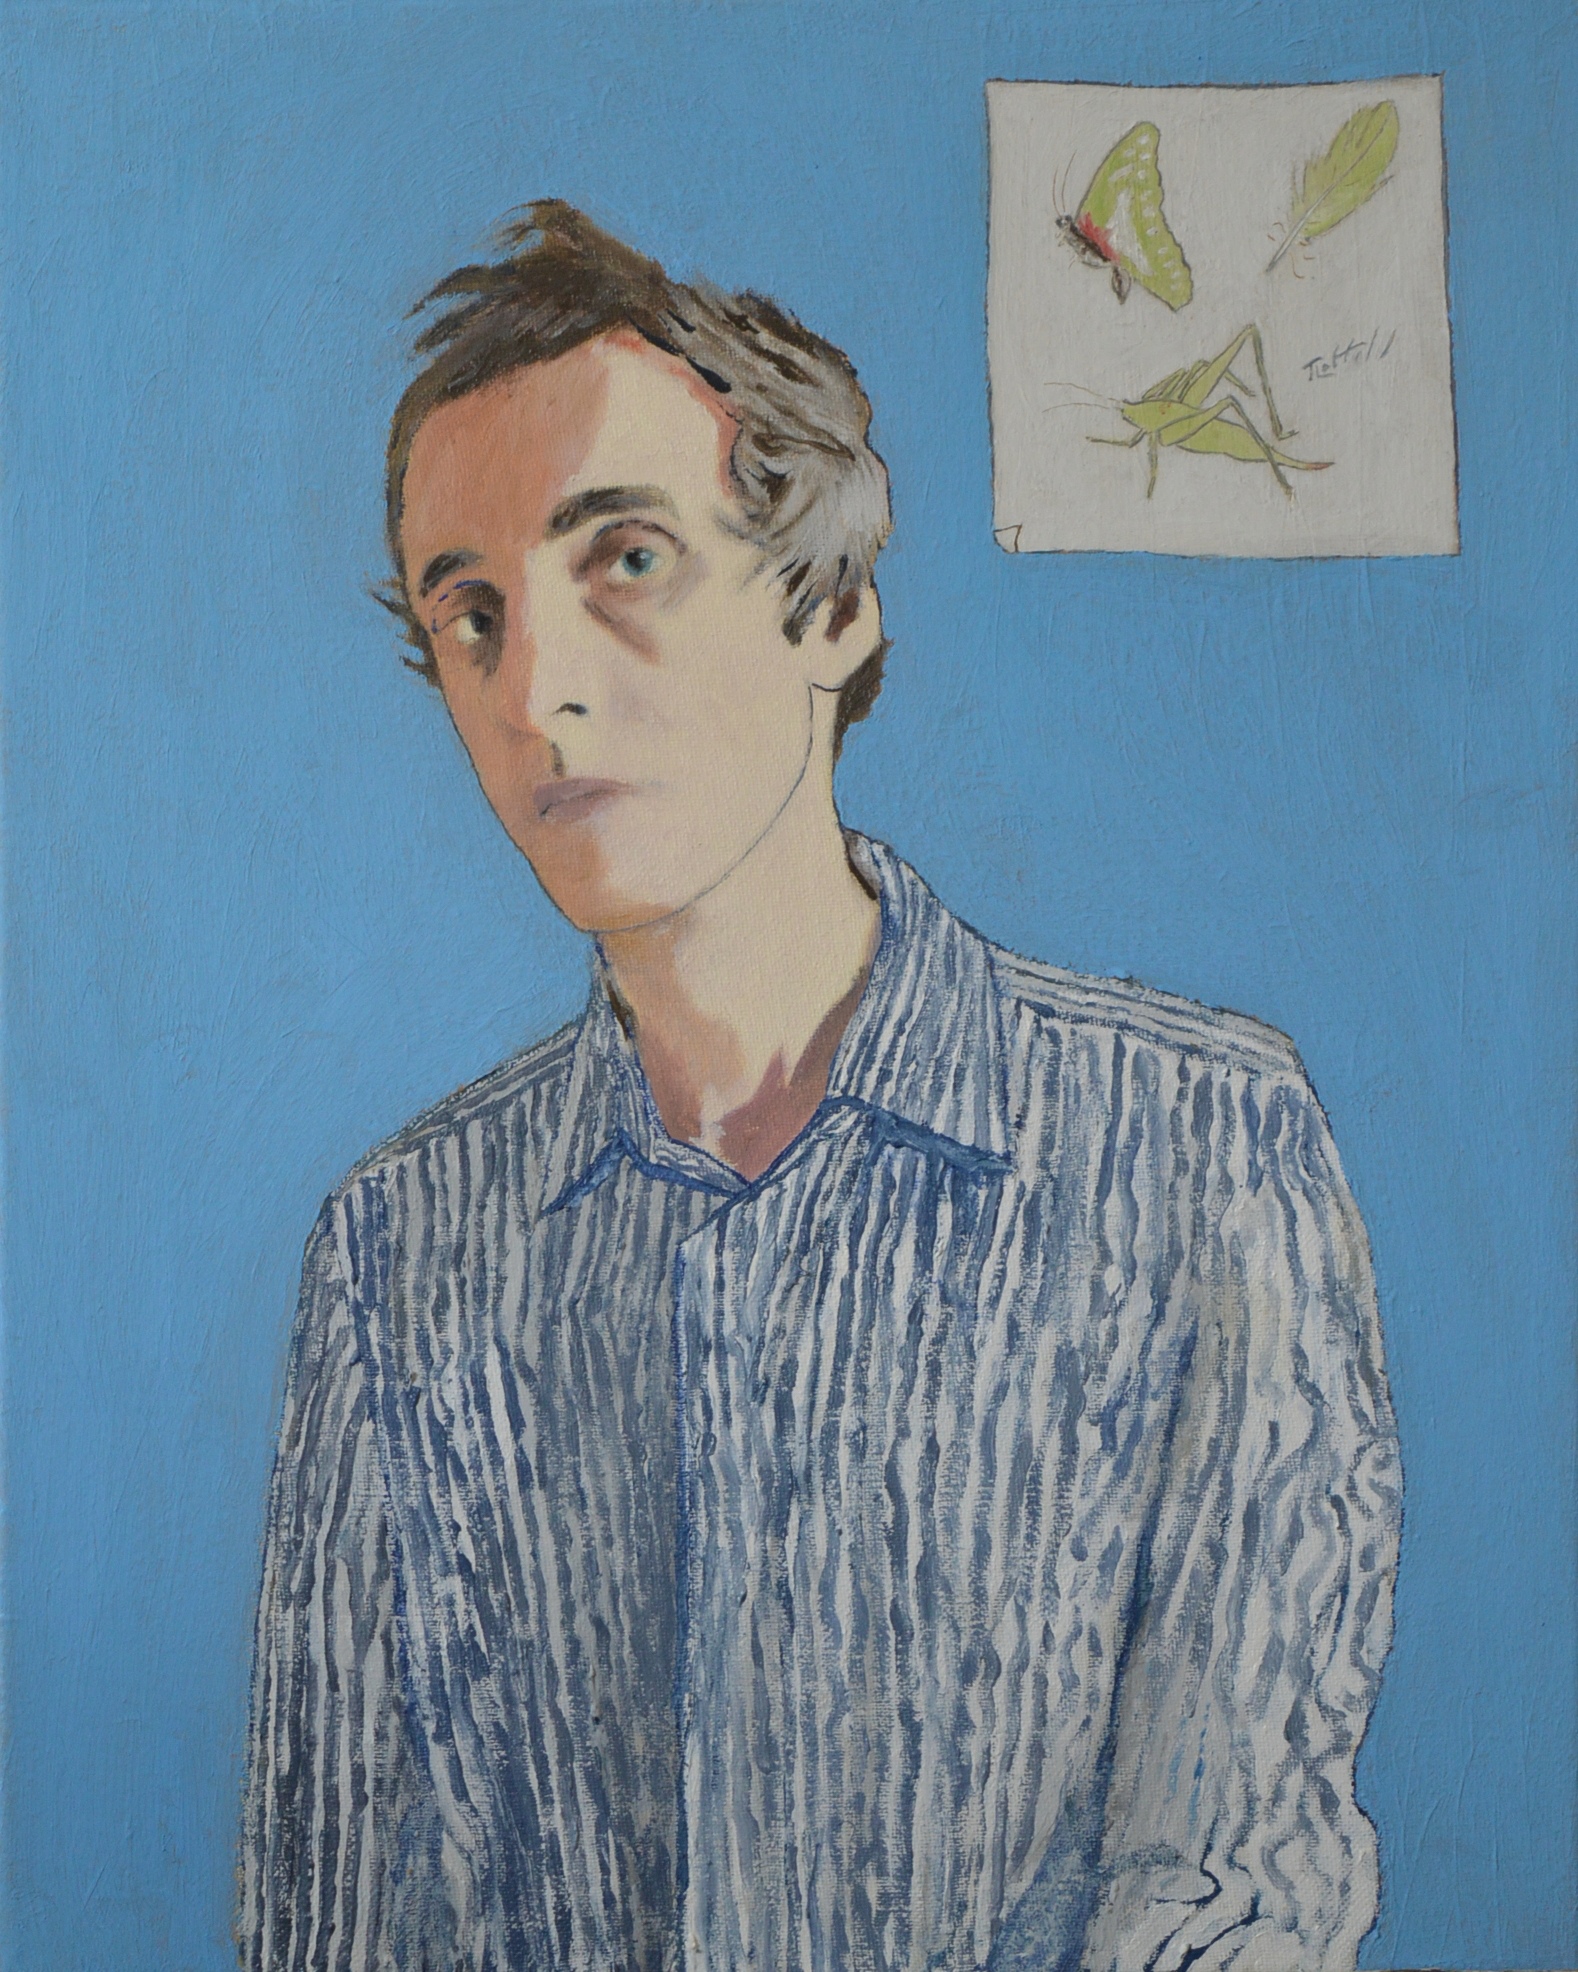 Self Portrait With Striped Shirt And Illustrations